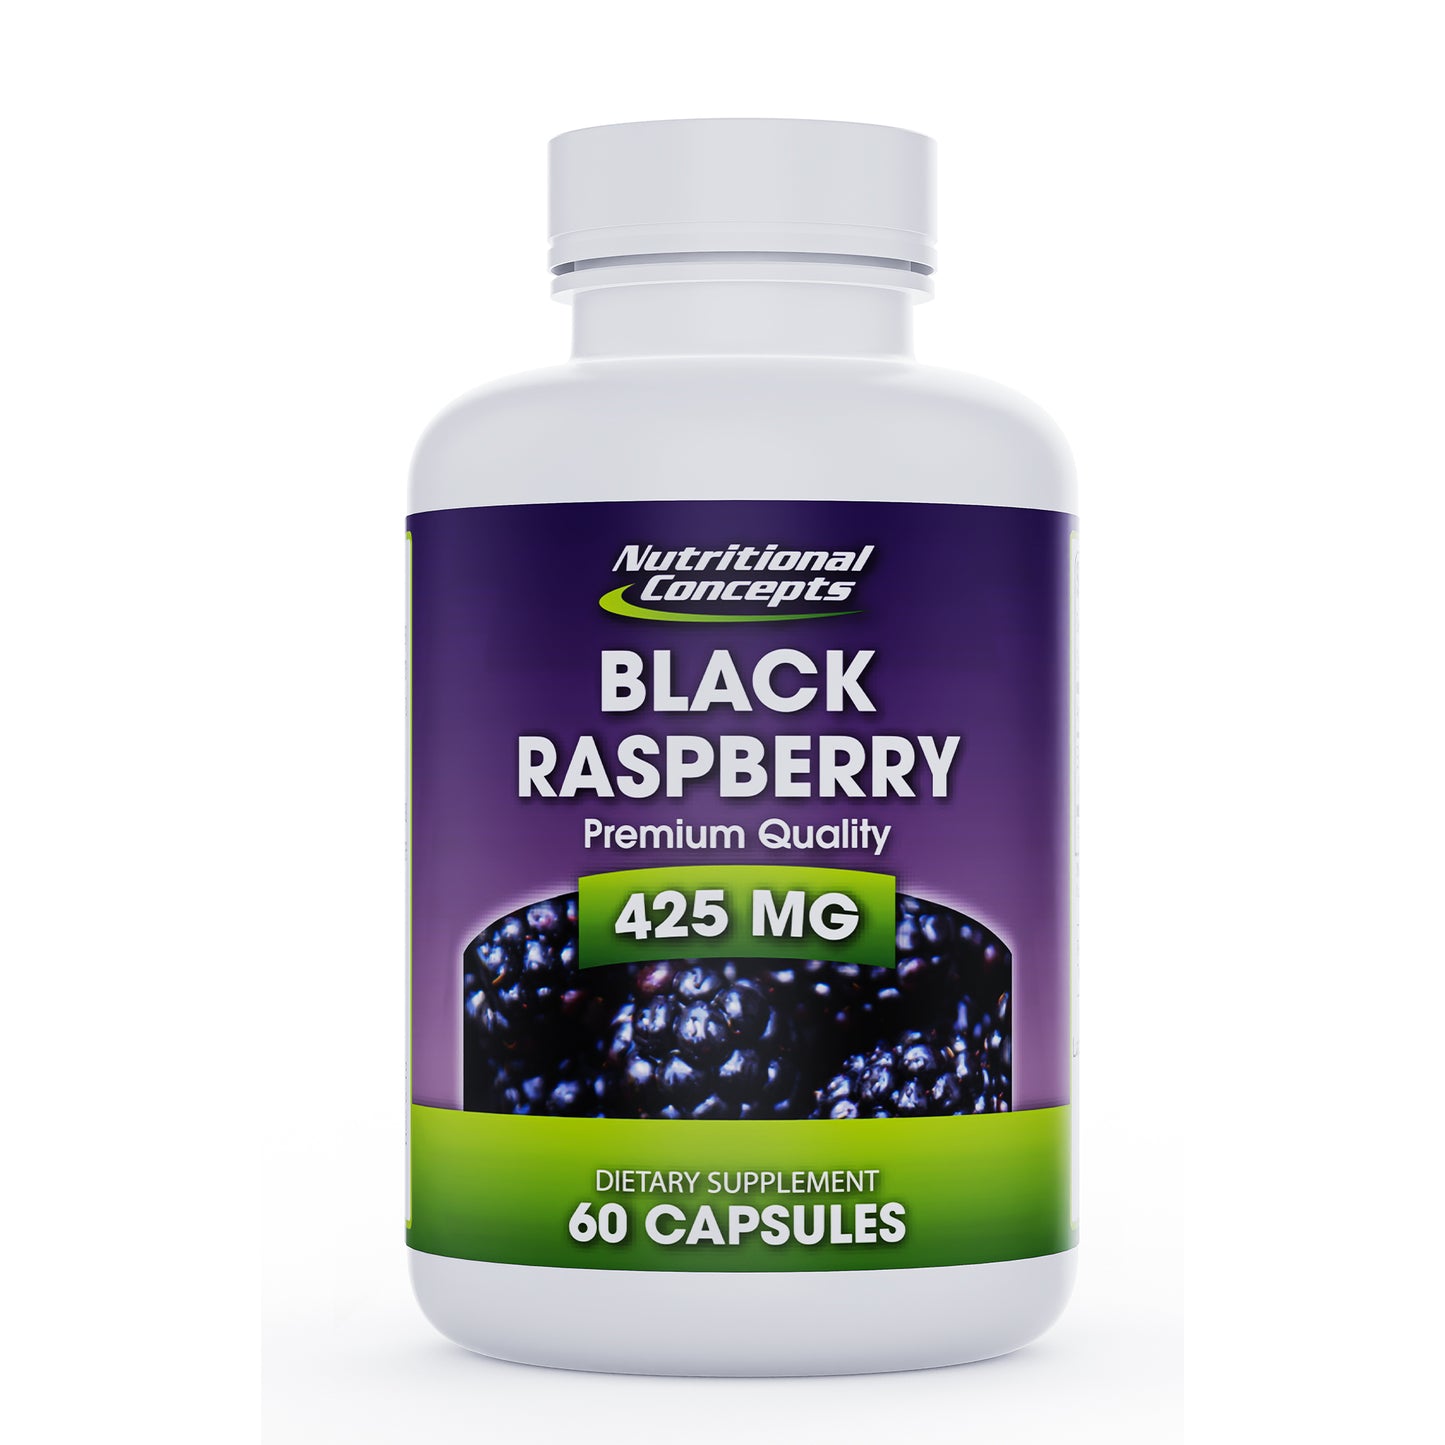 Nutritional Concepts Black Raspberry: 425mg - 60 Capsules